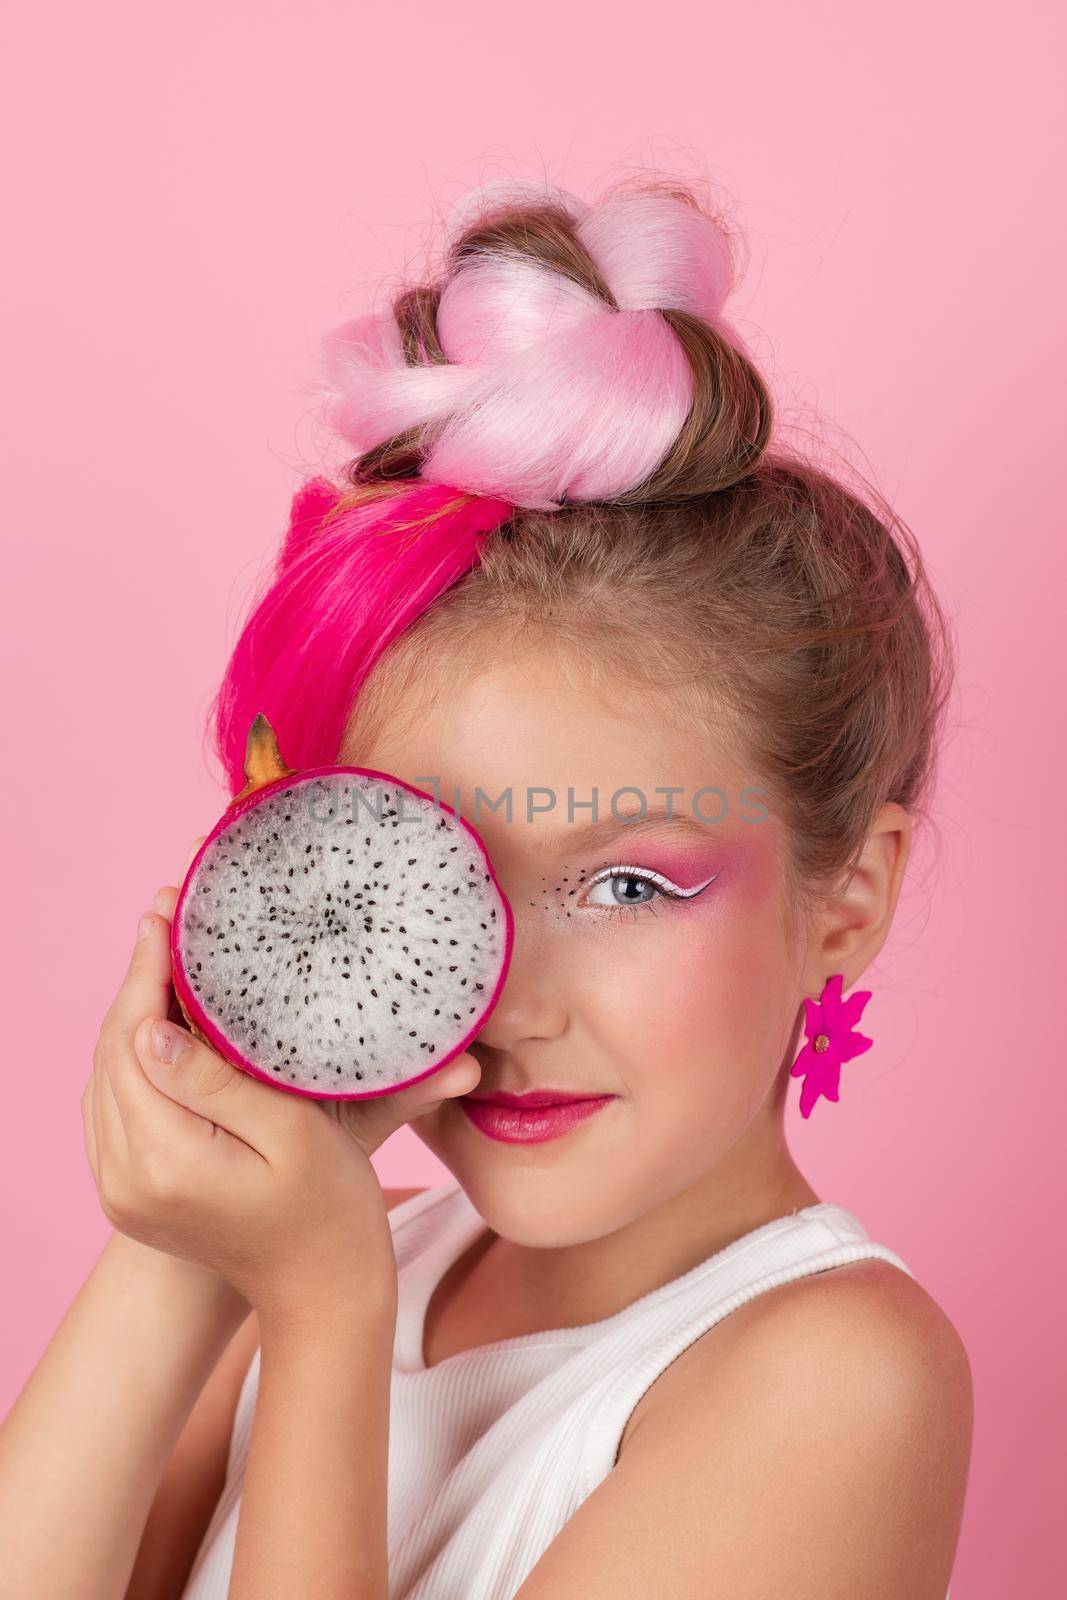 sweet Girl is holding a Pitahaya near her face. A pitaya fruit hold in hand on pink background. Tropical Dragon Fruit cut in half. space for text